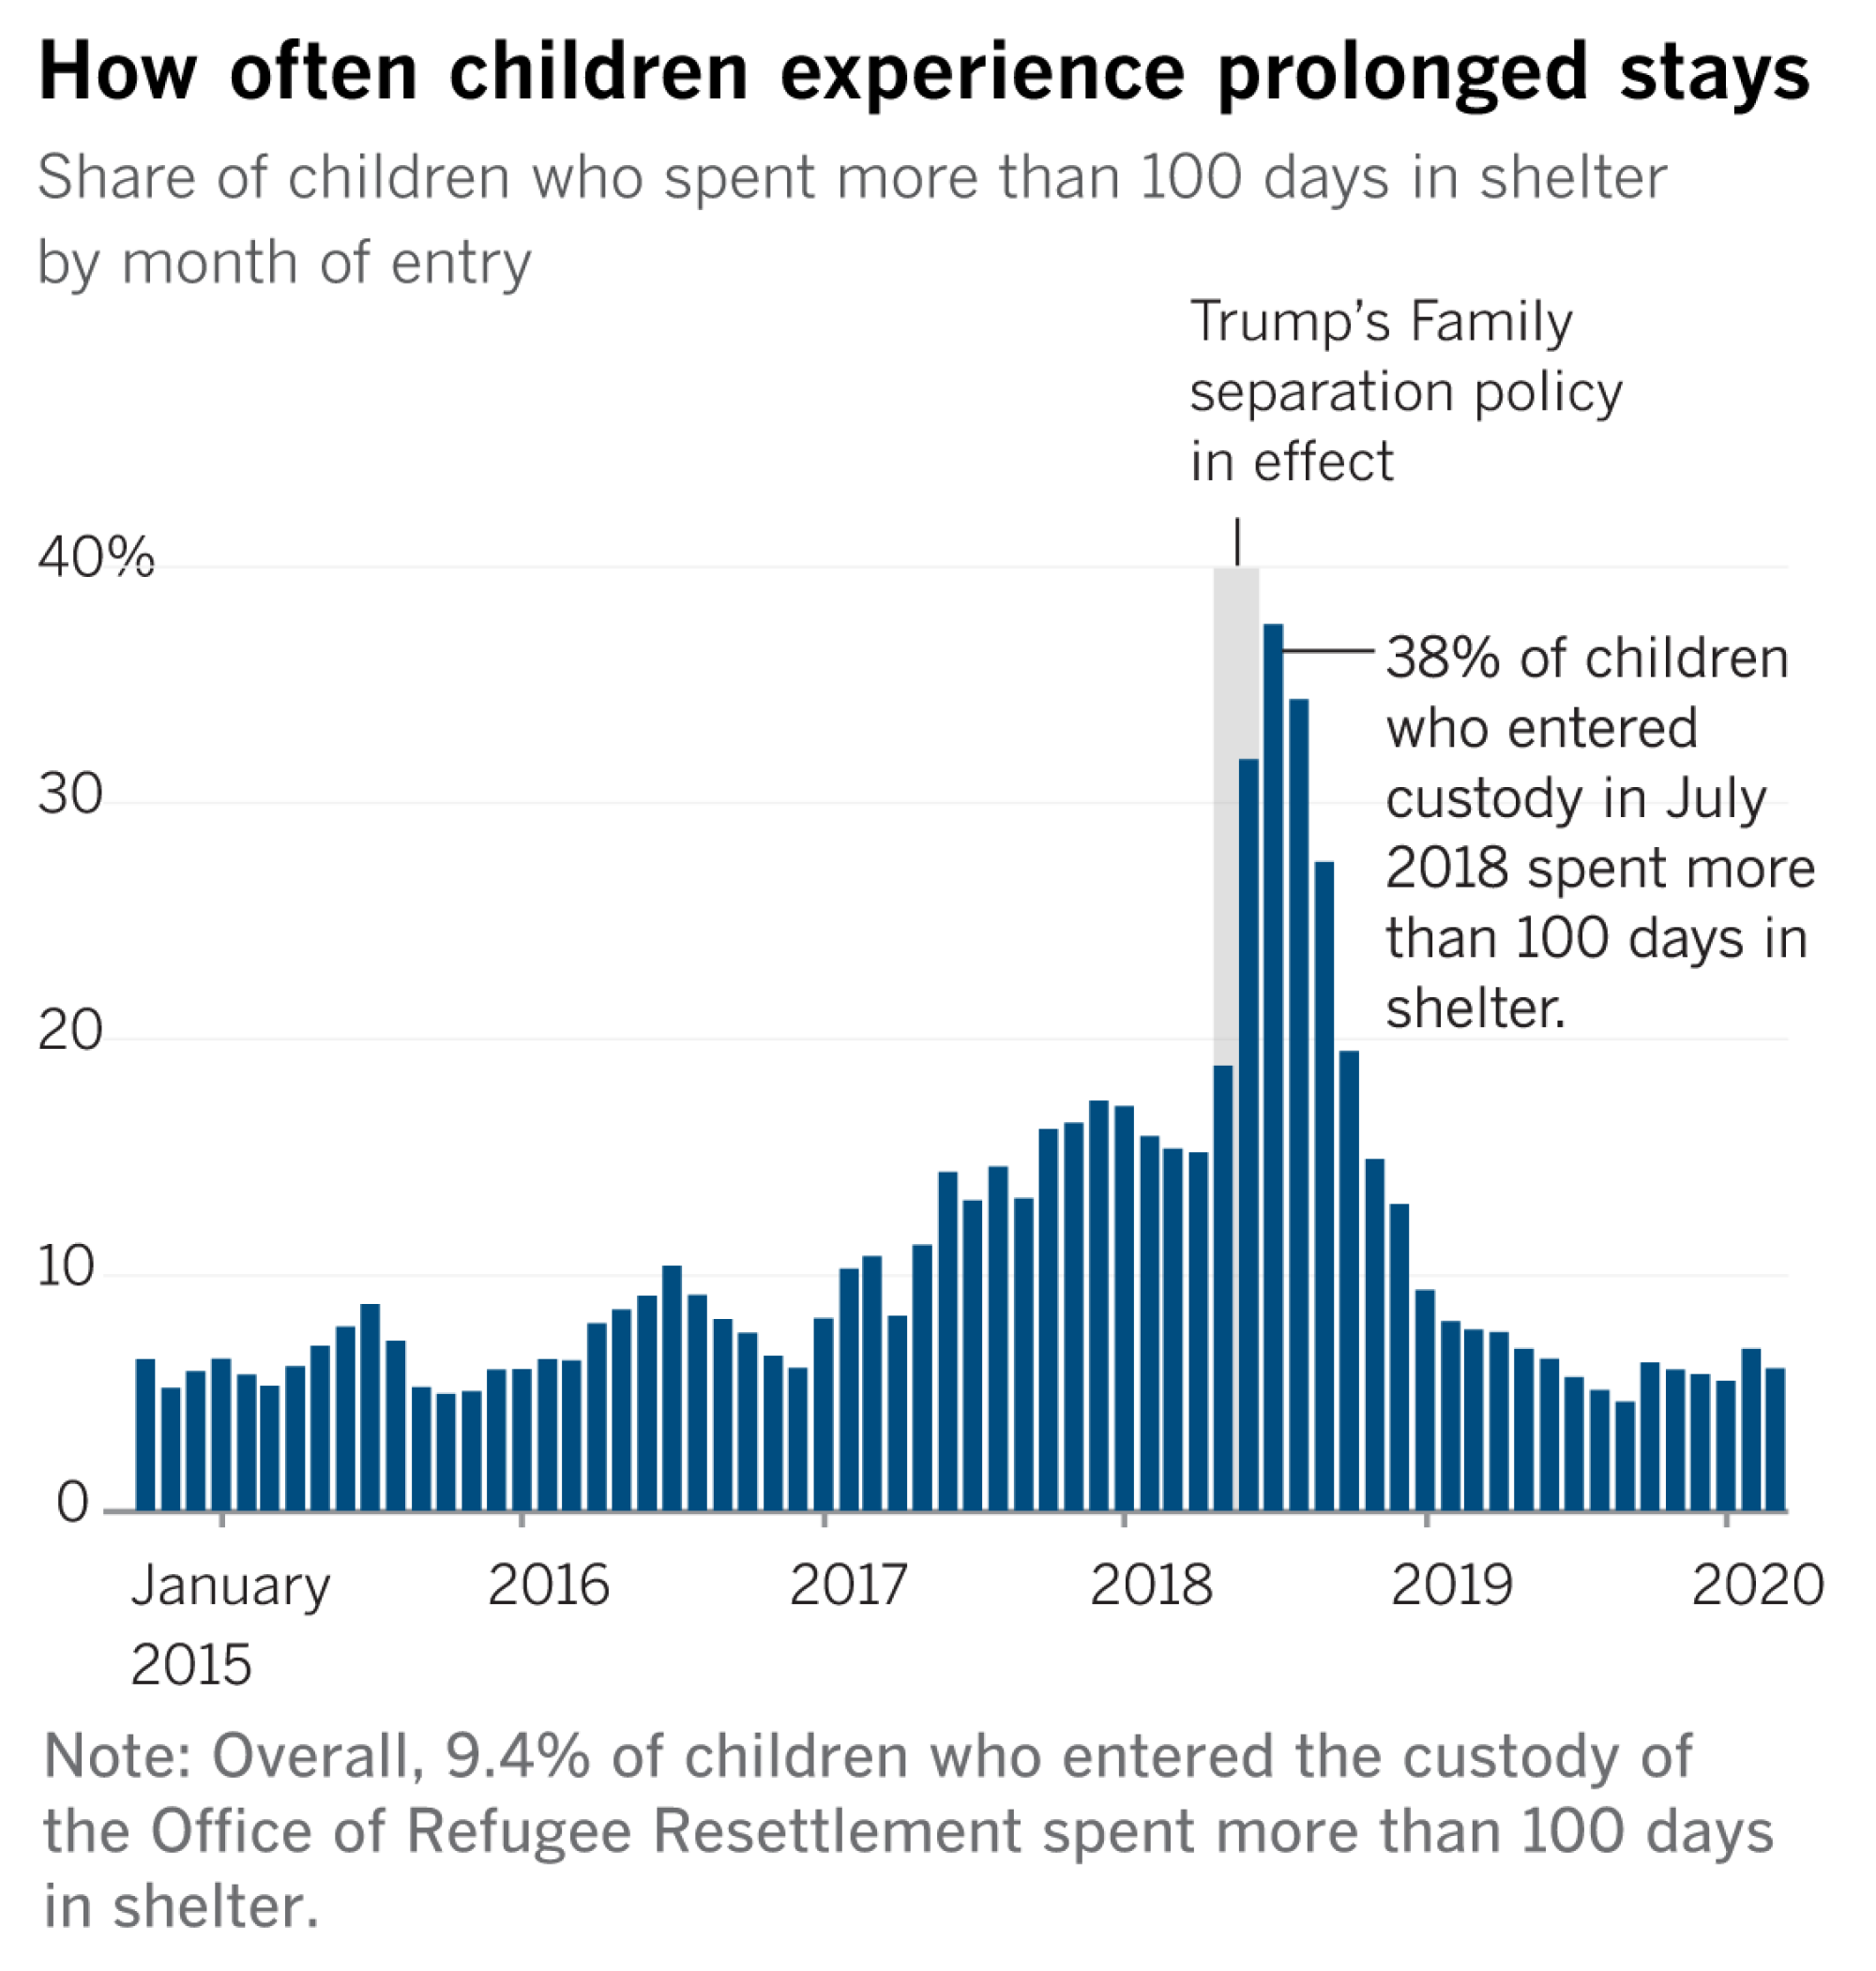 Bar chart shows share of children who spent more than 100 days in shelter by month of entry.